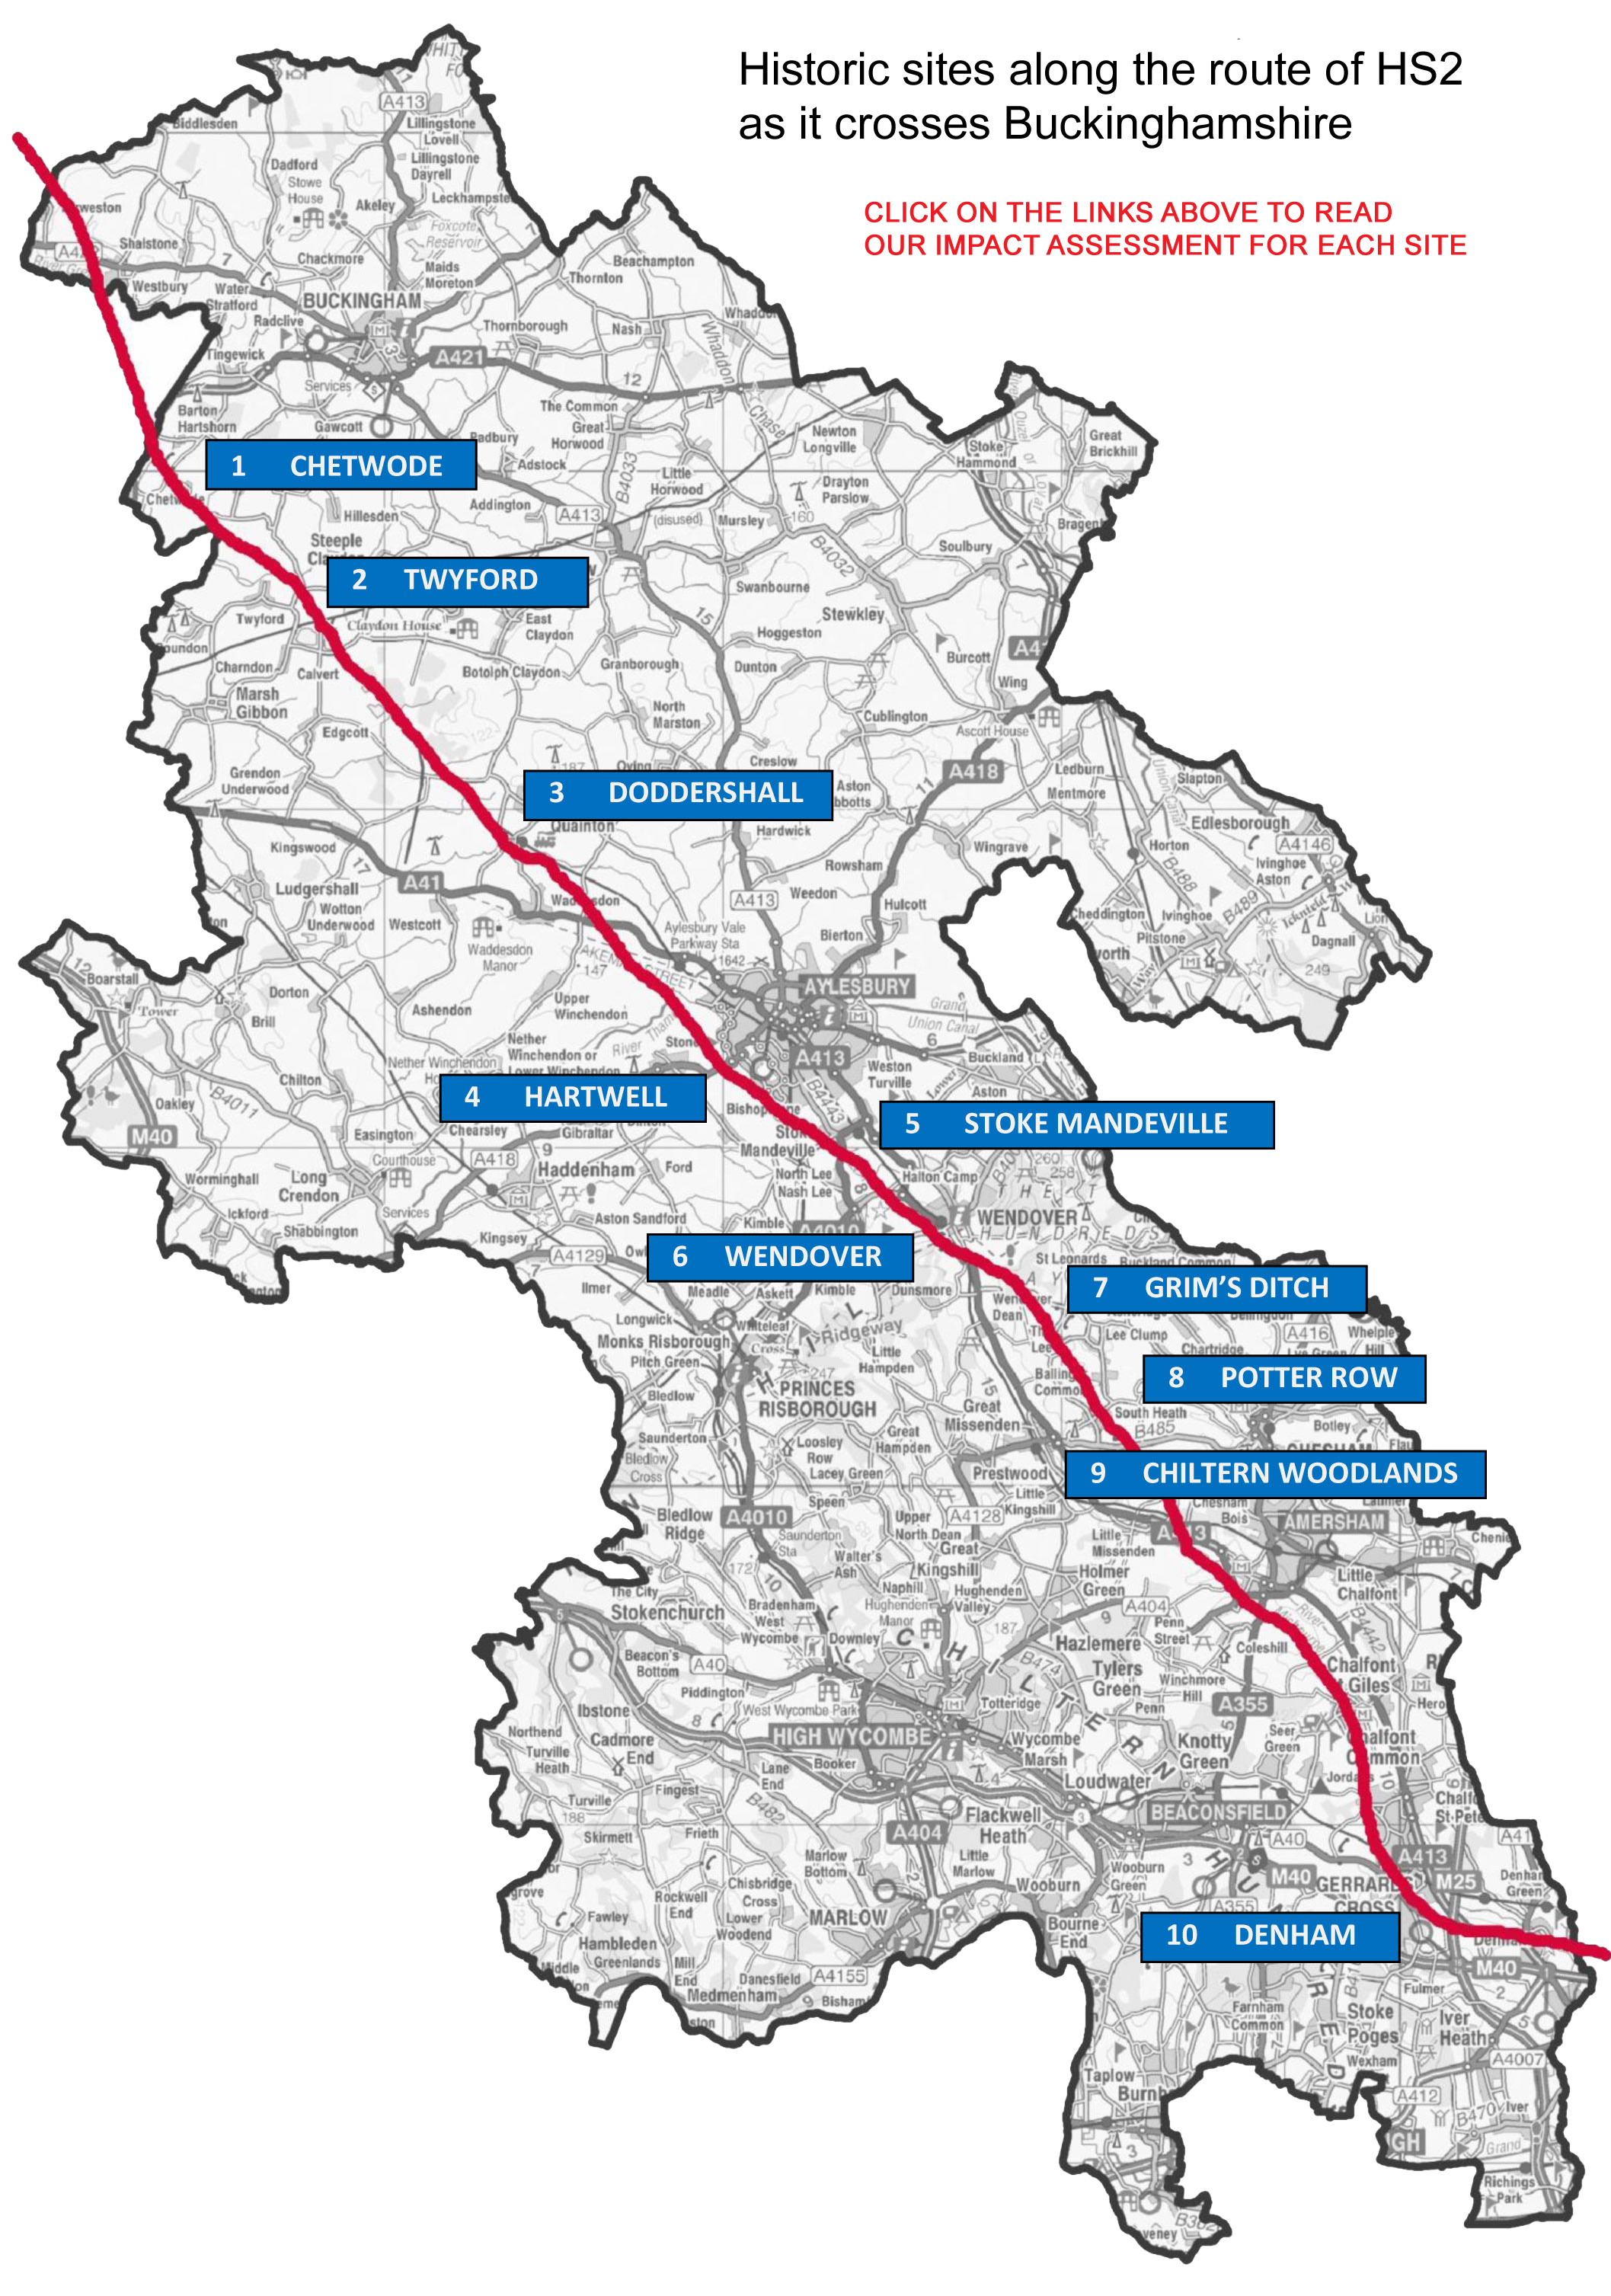 Map showing historic sites along the route of HS2 across Buckinghamshire